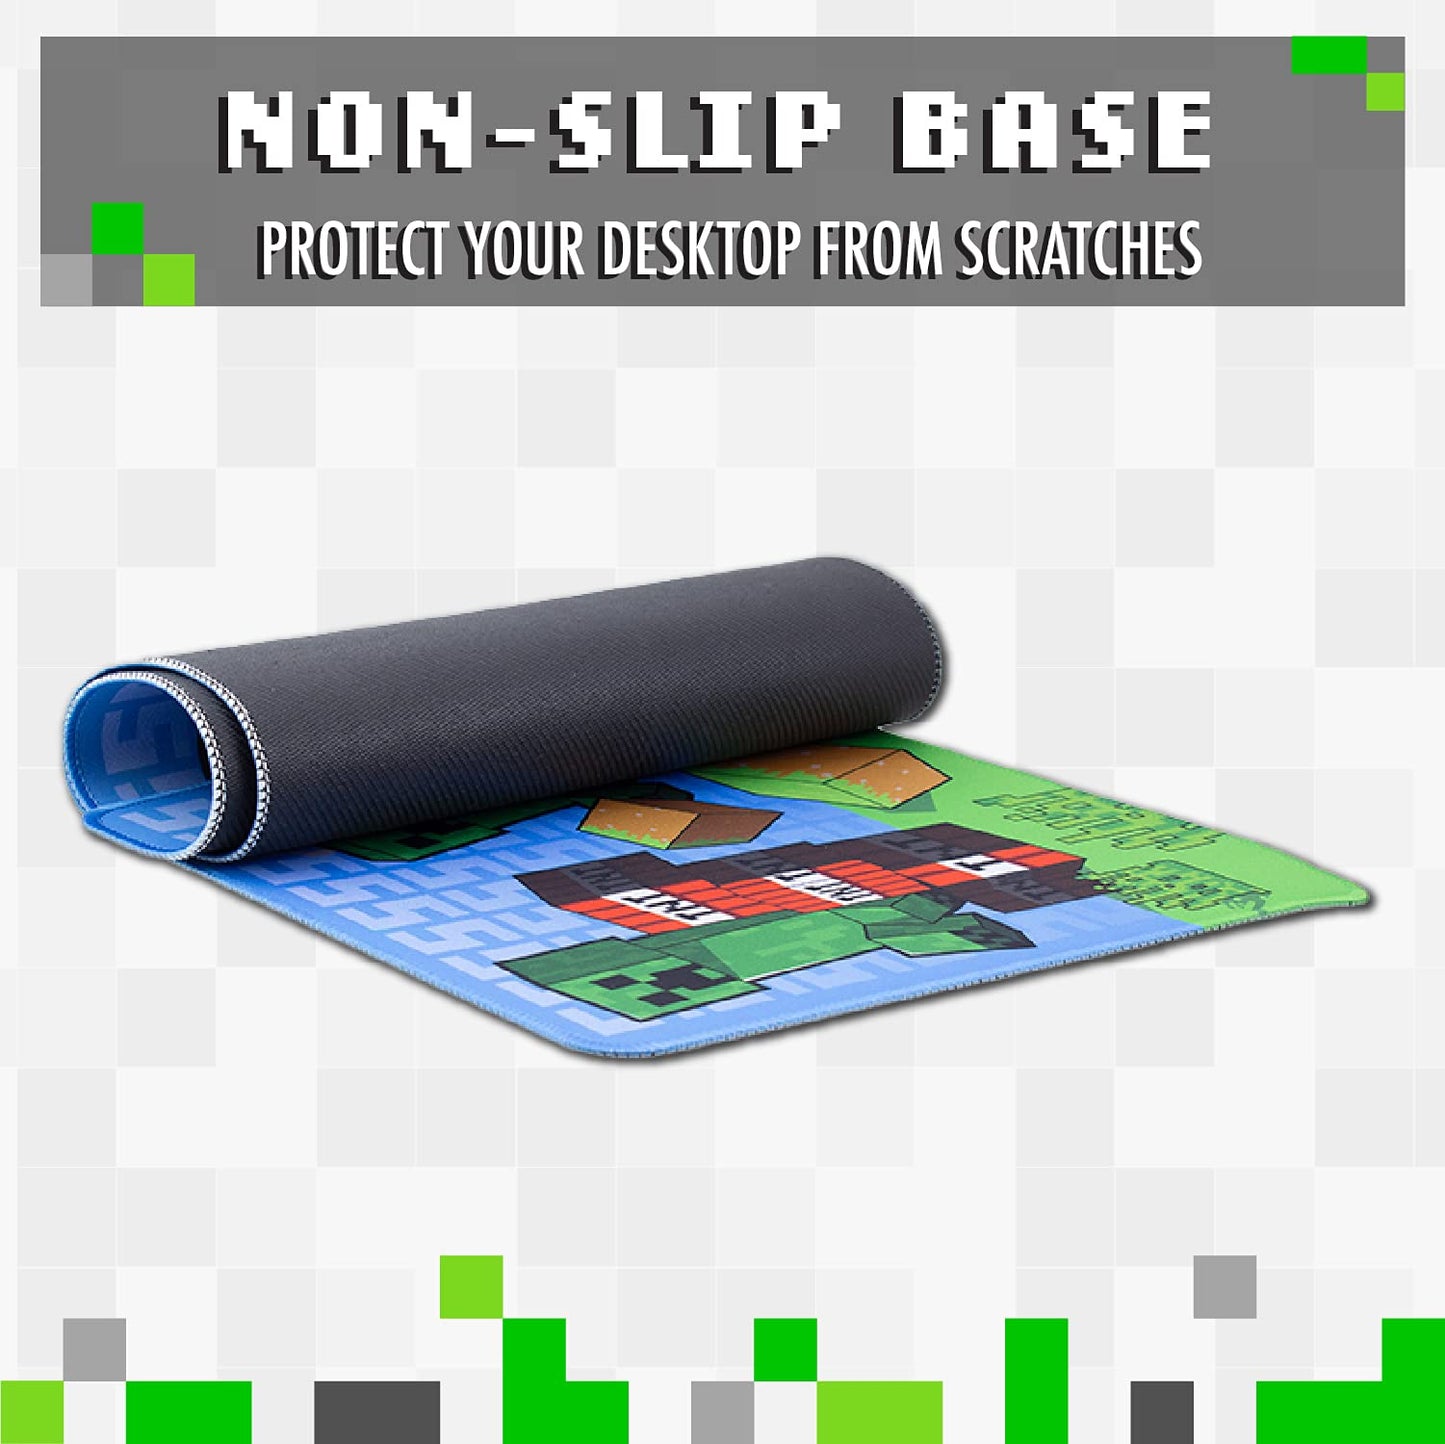 Paladone Minecraft Creeper Large Gaming Mouse Pad for Desk Keyboard Mousepad Non-Slip - amzGamess